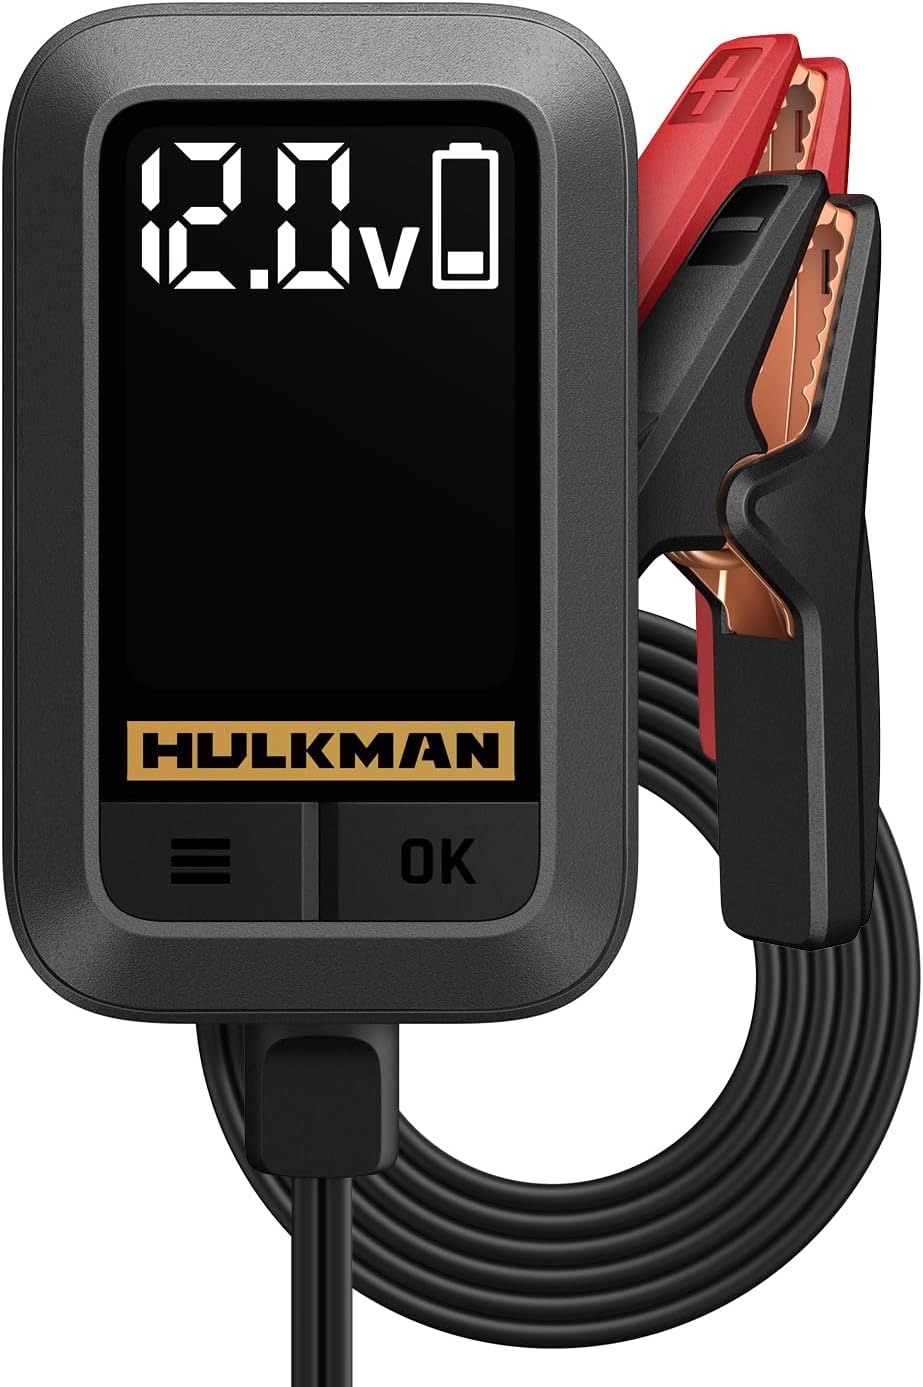 HULKMAN Sigma 1 Car Battery Charger, 1A 6V/12V Automatic Smart Trickle Charger, Battery Maintainer, and Desulfator with Intelligent Interface - HULKMAN Sigma 1 Car Battery Charger Review